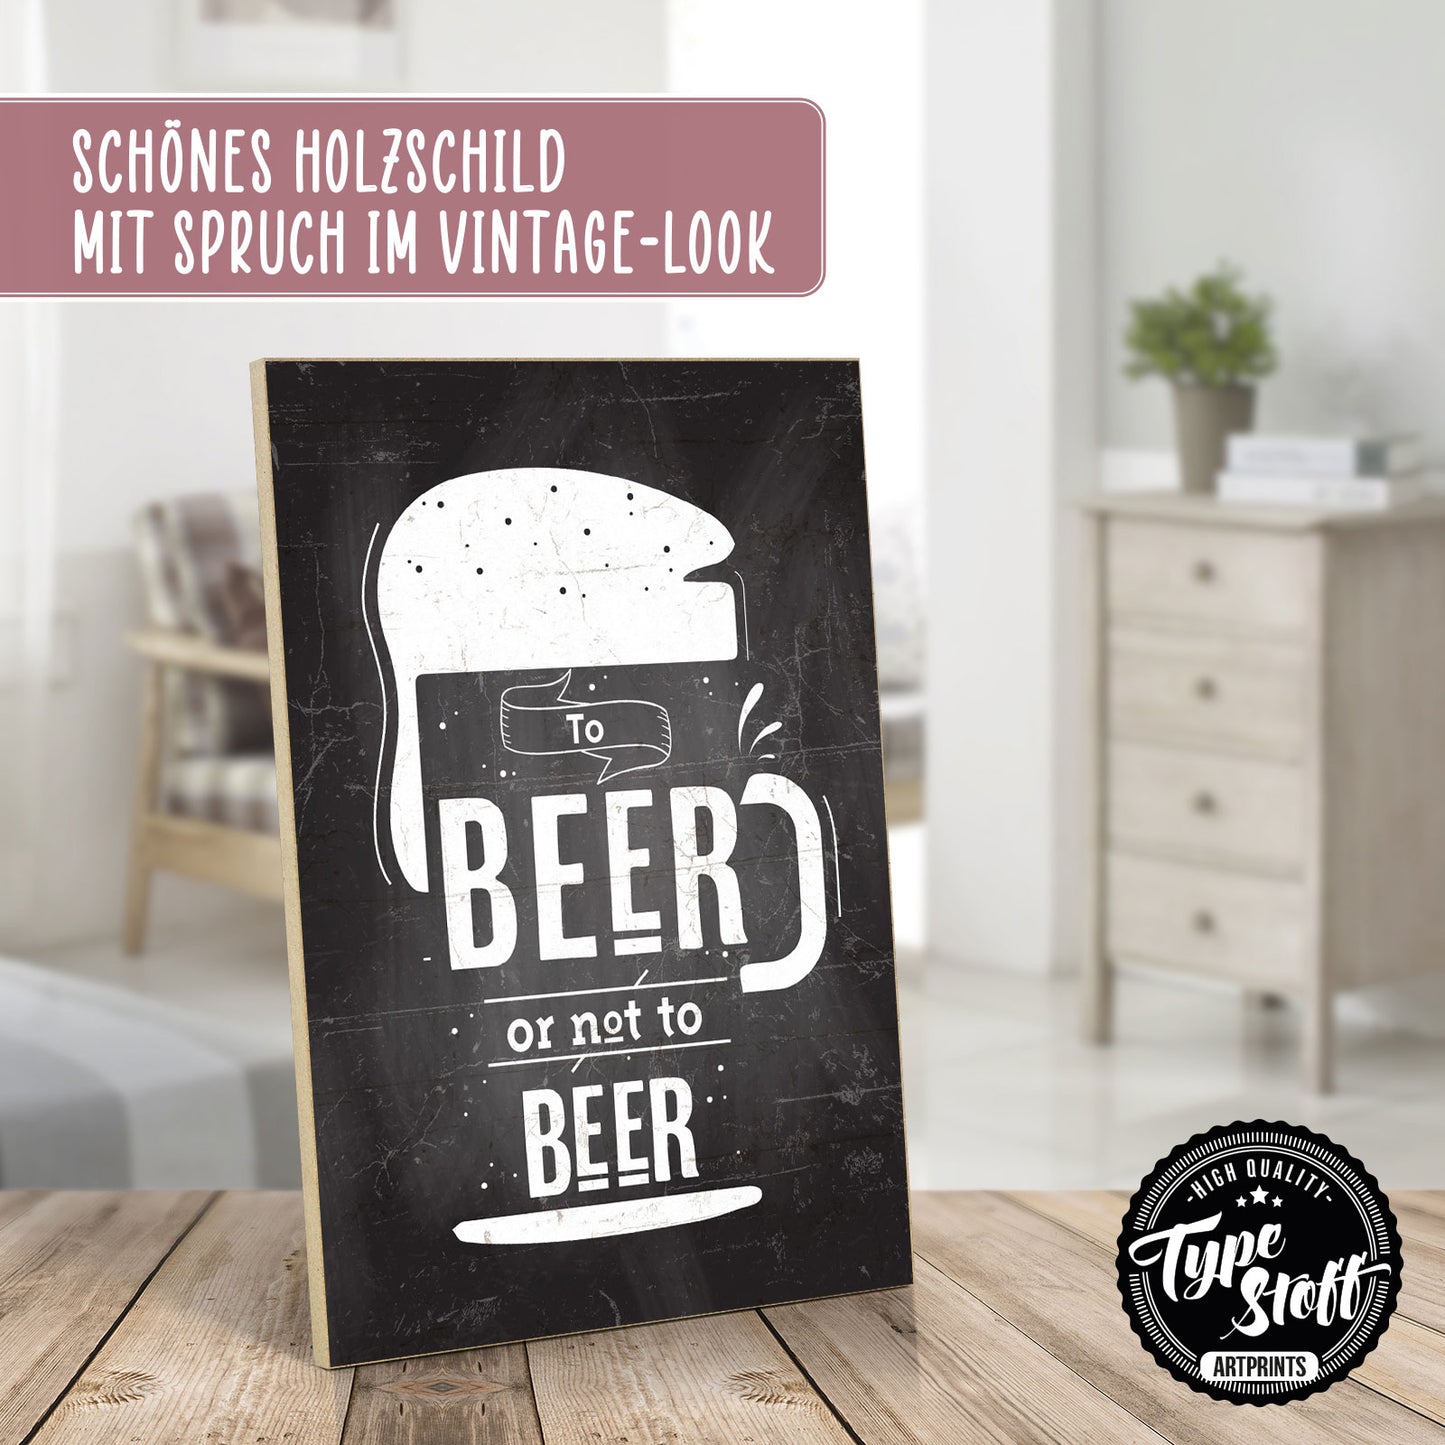 Holzschild mit Spruch - To beer or not to beer - HS-GH-01261